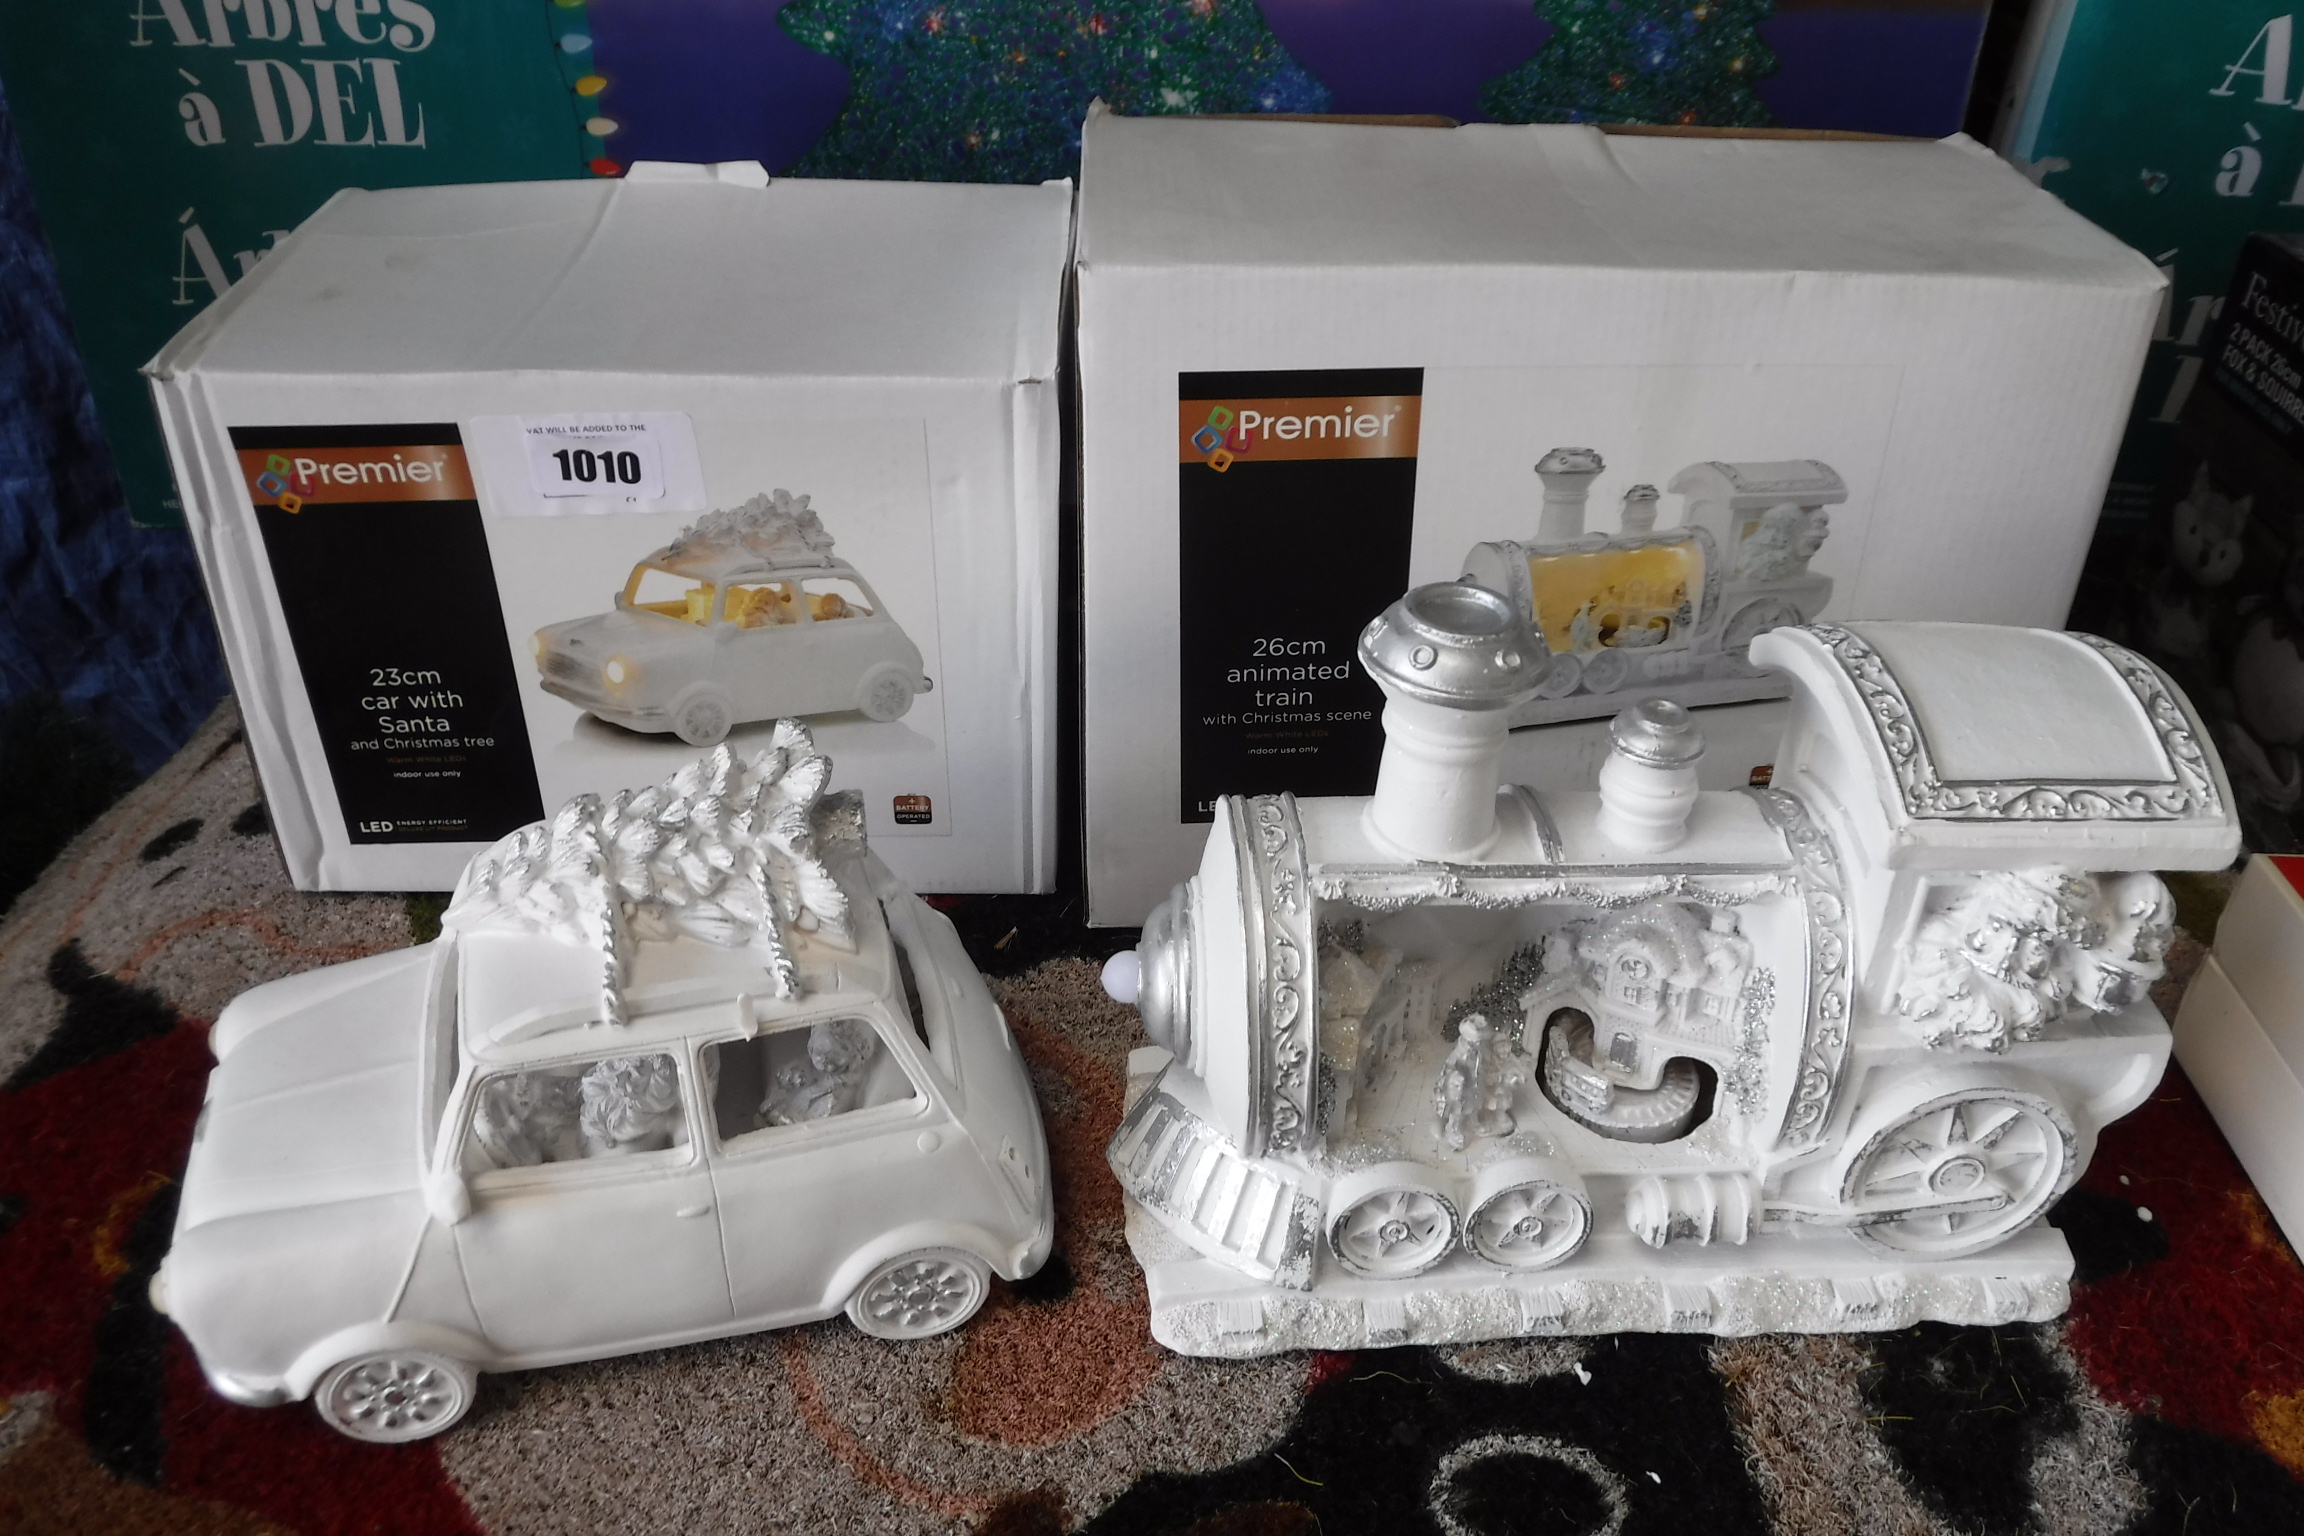 Boxed LED 23cm car together with a 26cm LED light up animated train